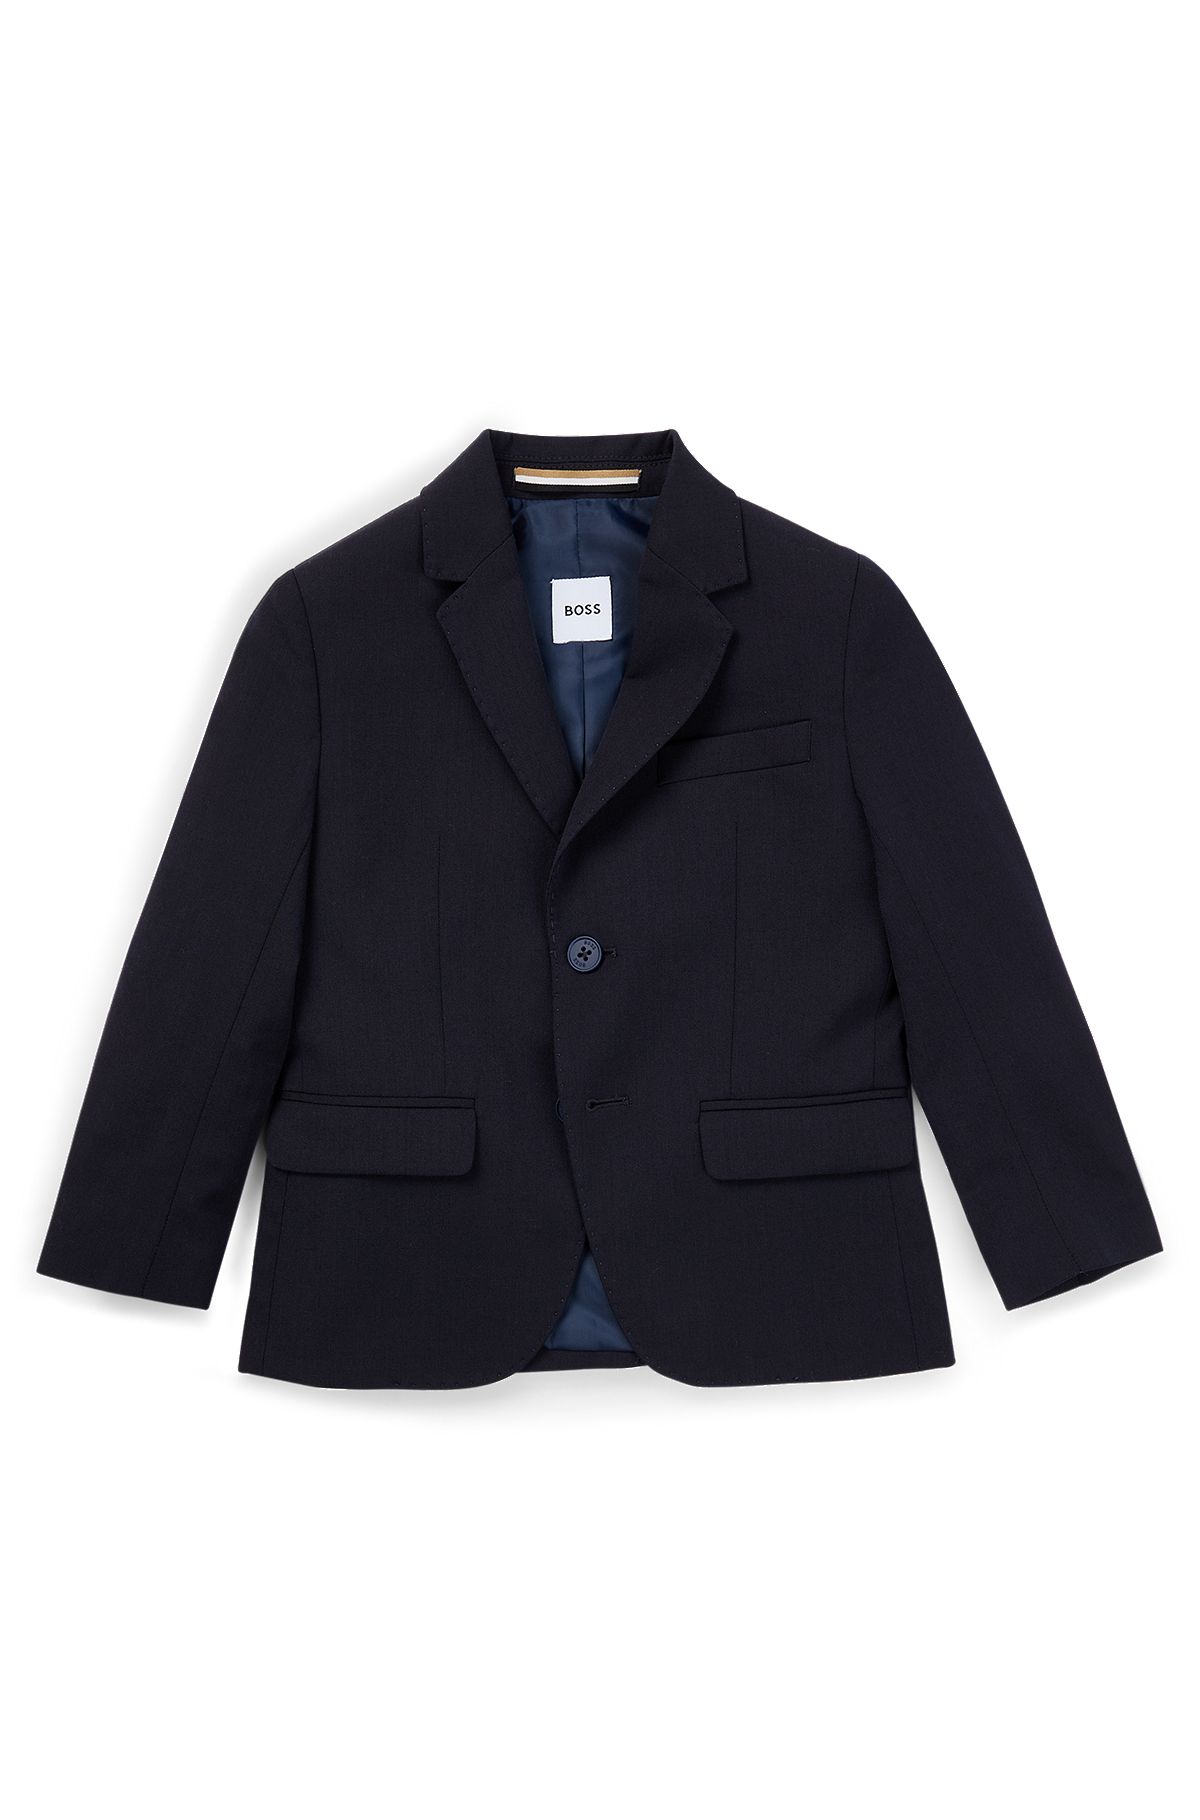 Kids' suit jacket in stretch wool with signature lining, Dark Blue